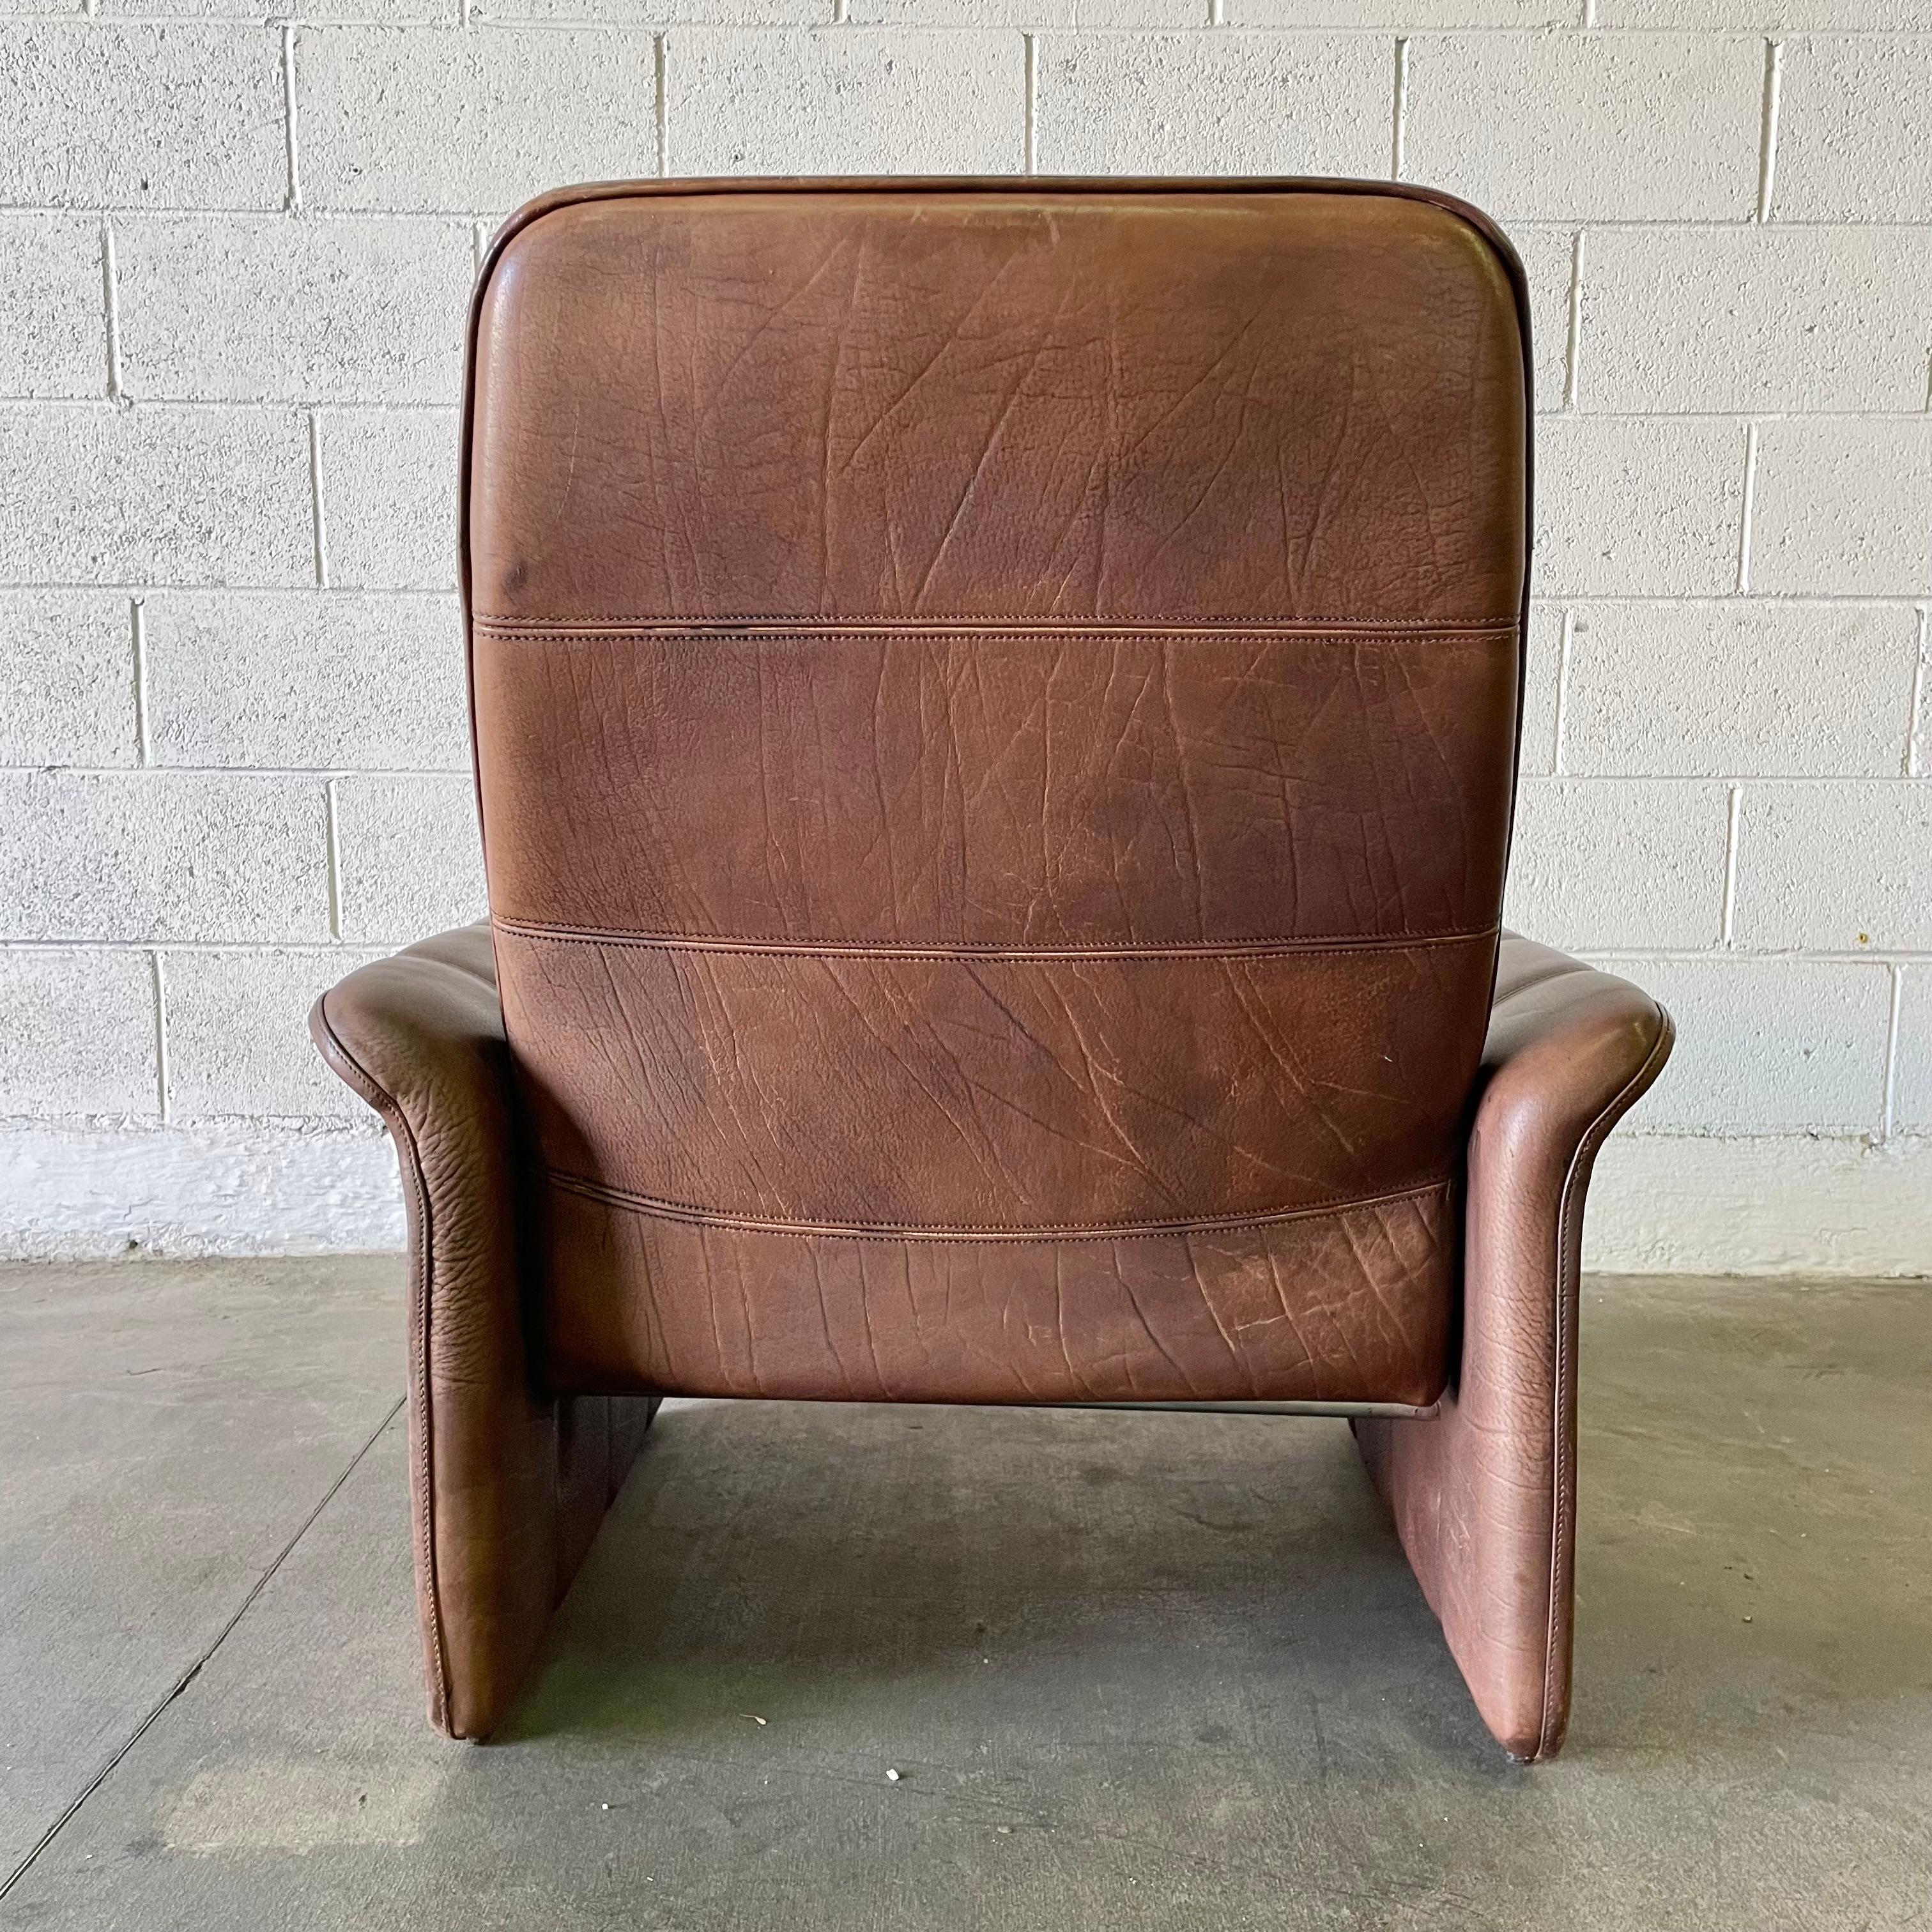 Swiss De Sede DS-50 Chocolate Brown Recliner Chair  For Sale